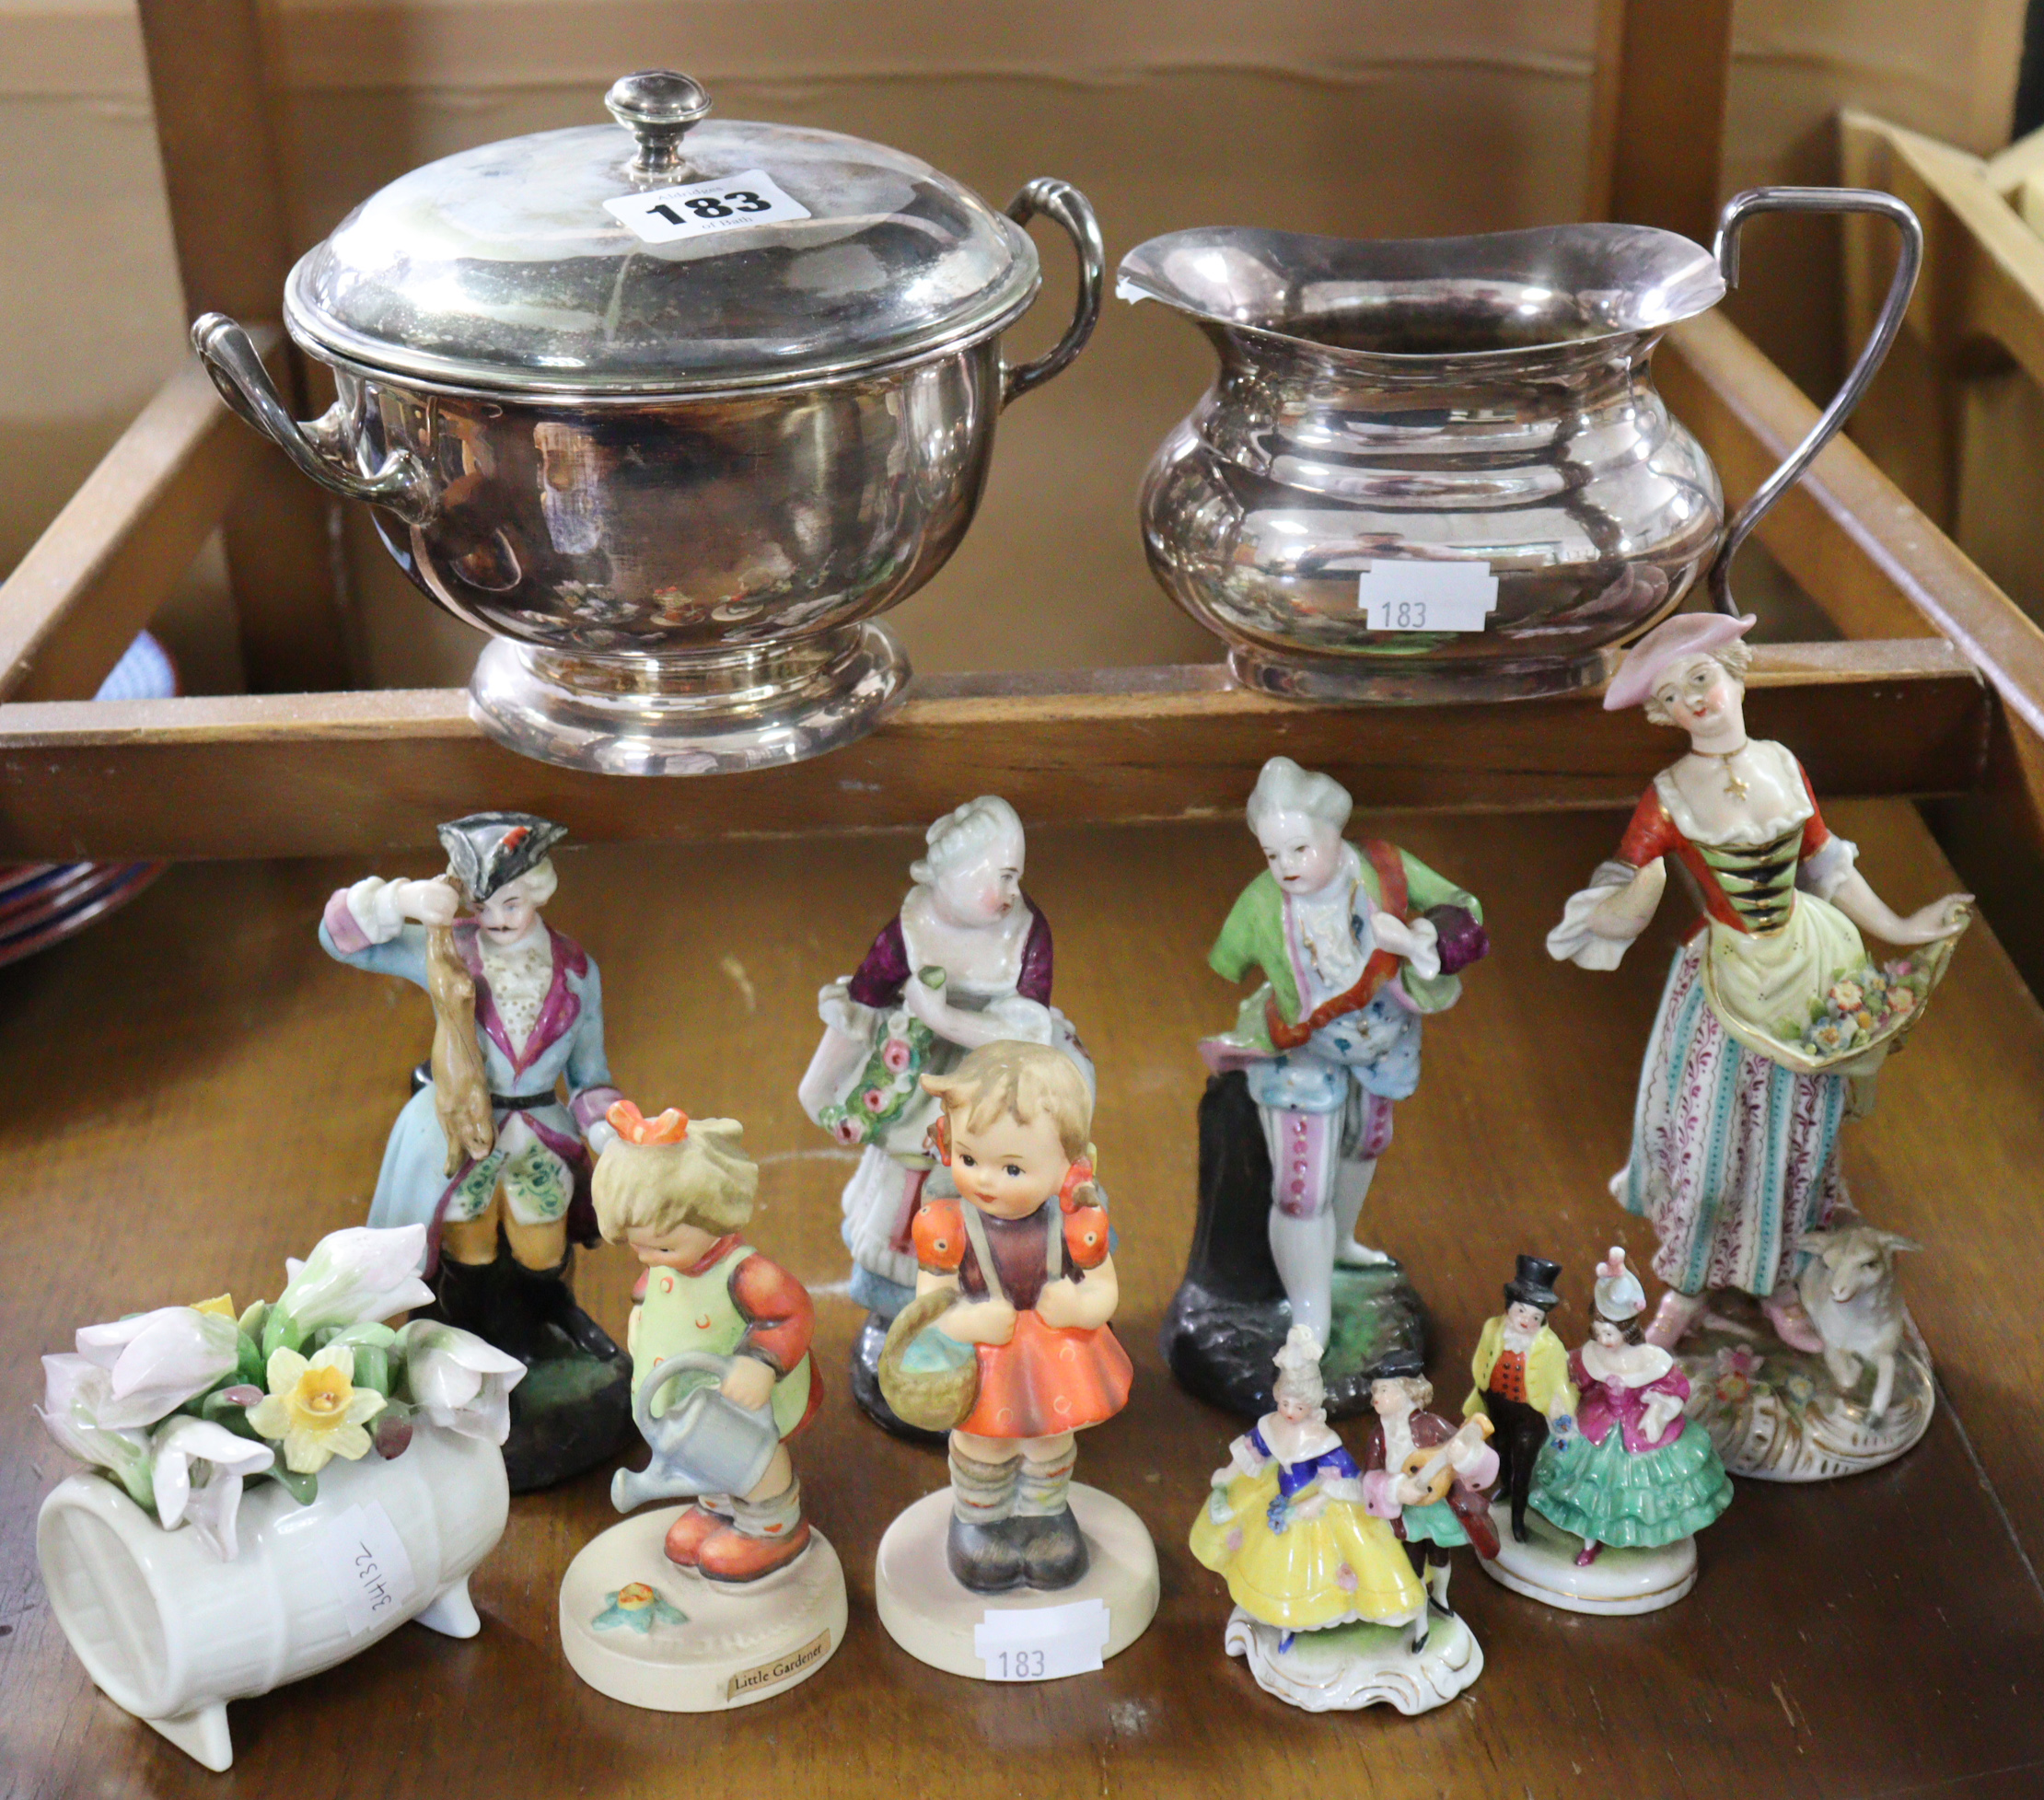 Two Goebel Hummel figures, one titled “Little Gardener”; together with various other decorative